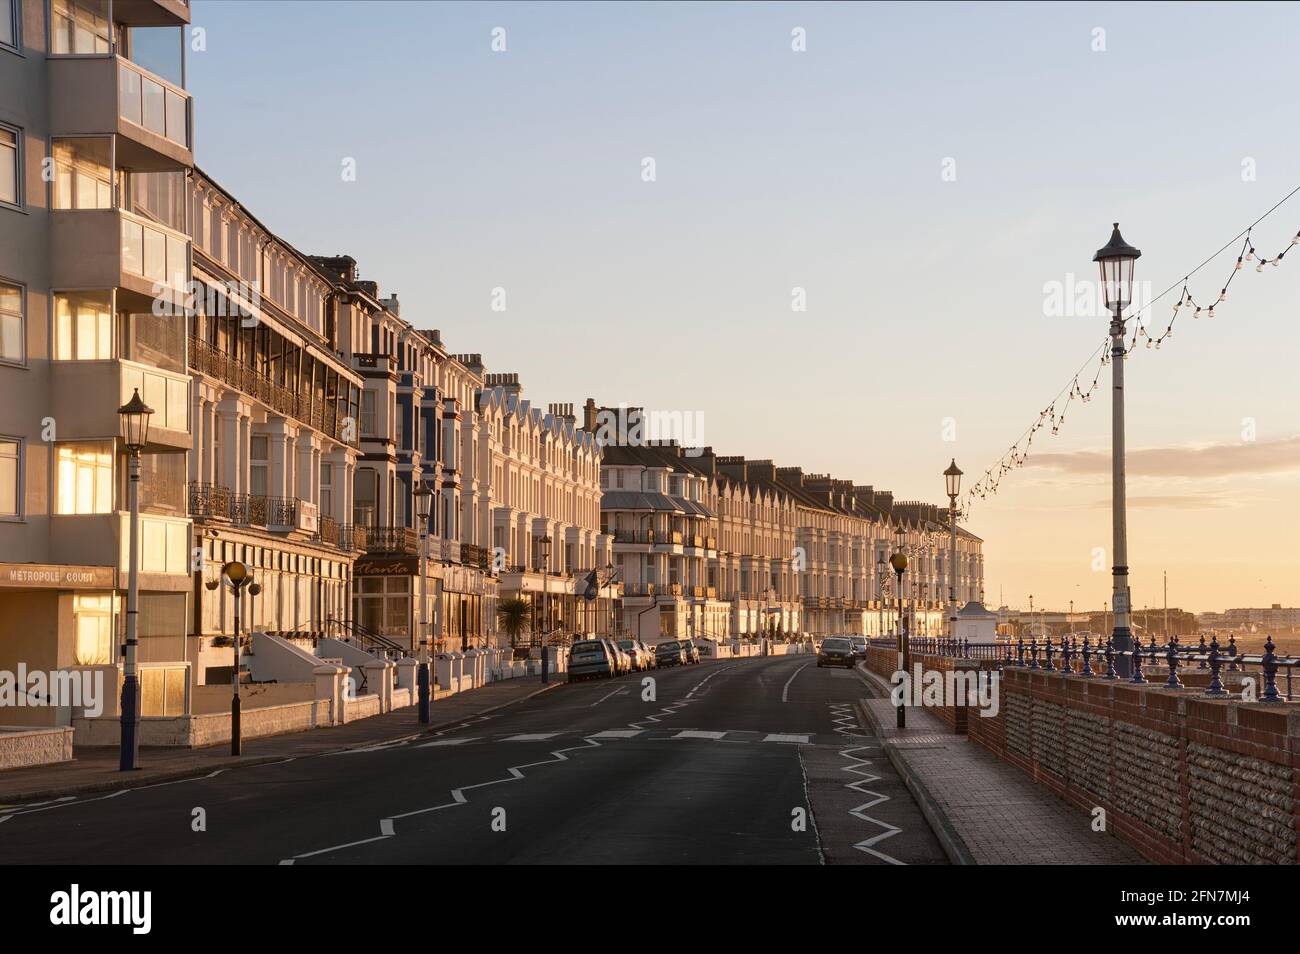 EASTBOURNE, EAST SUSSEX, UK - APRIL 30, 2012:  Sunlit guest houses and hotels along Grand Parade Stock Photo